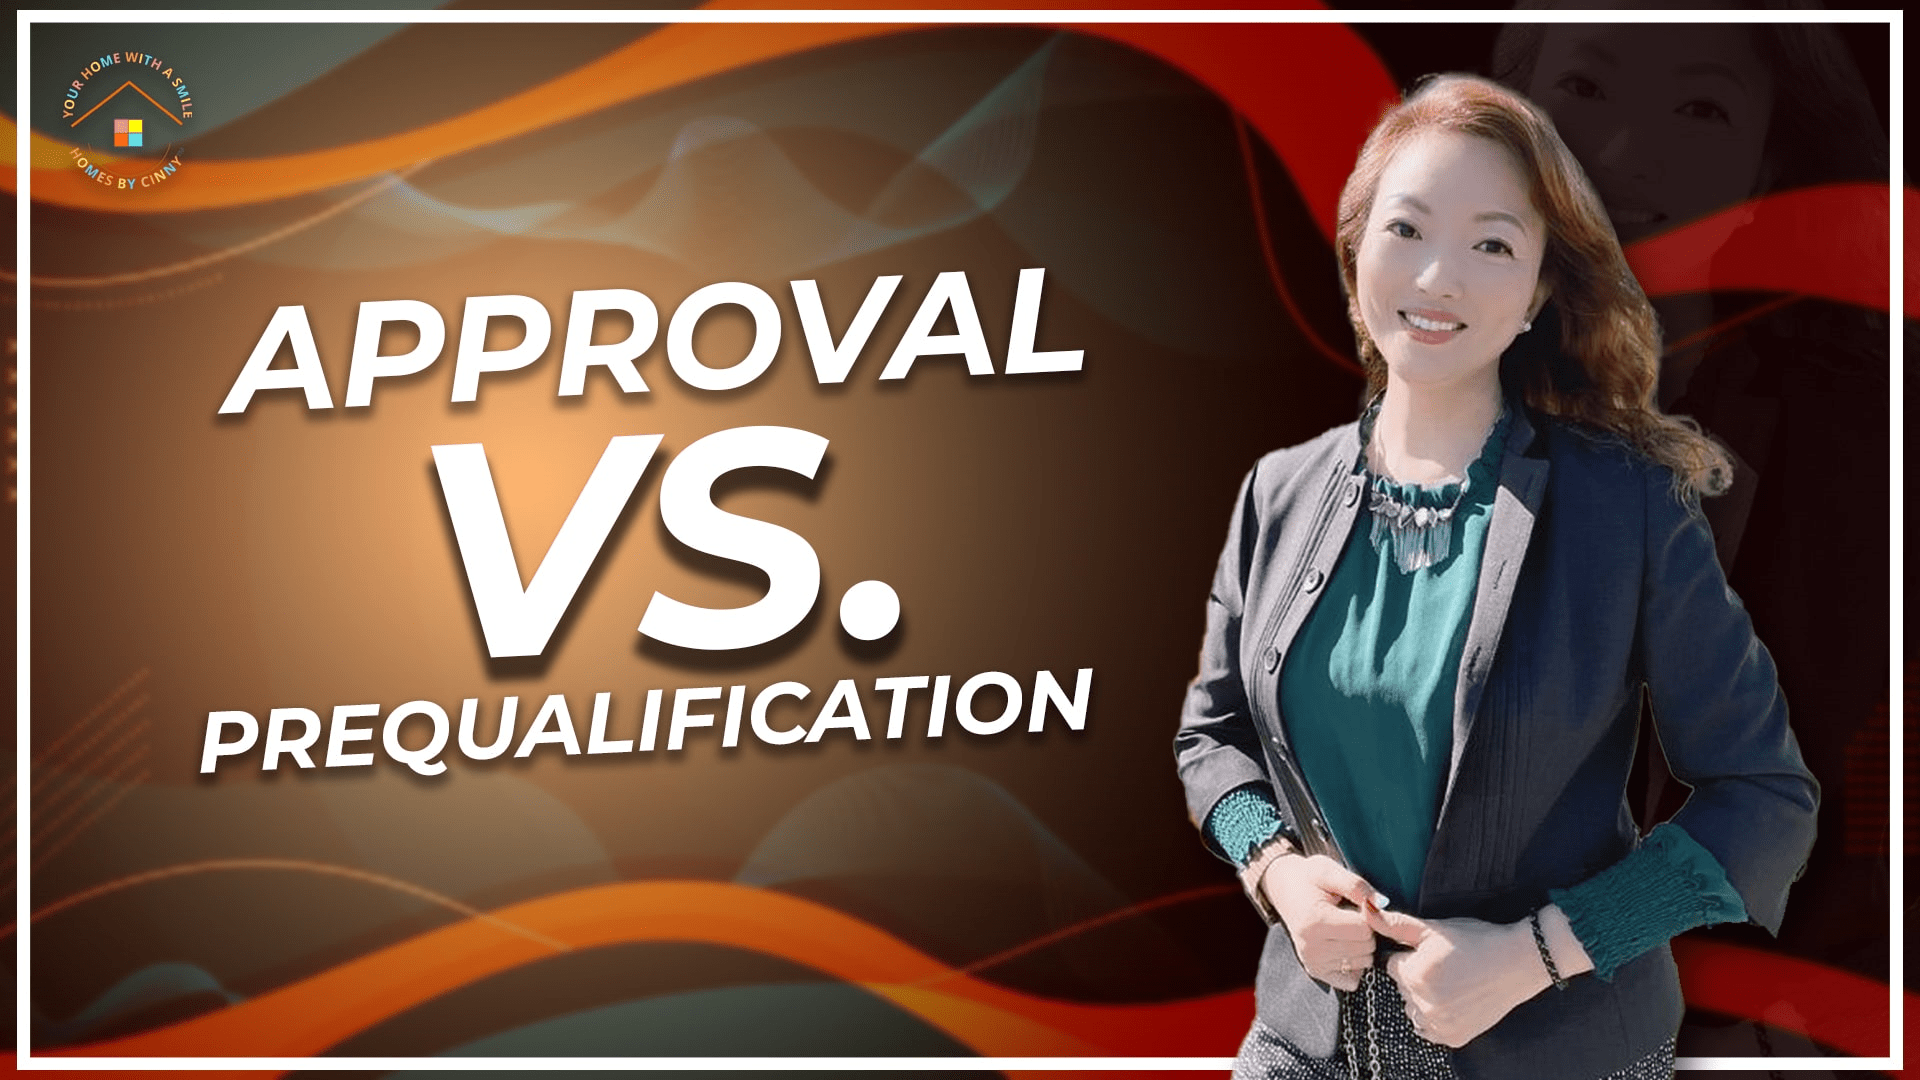 Approval versus pre-qualification